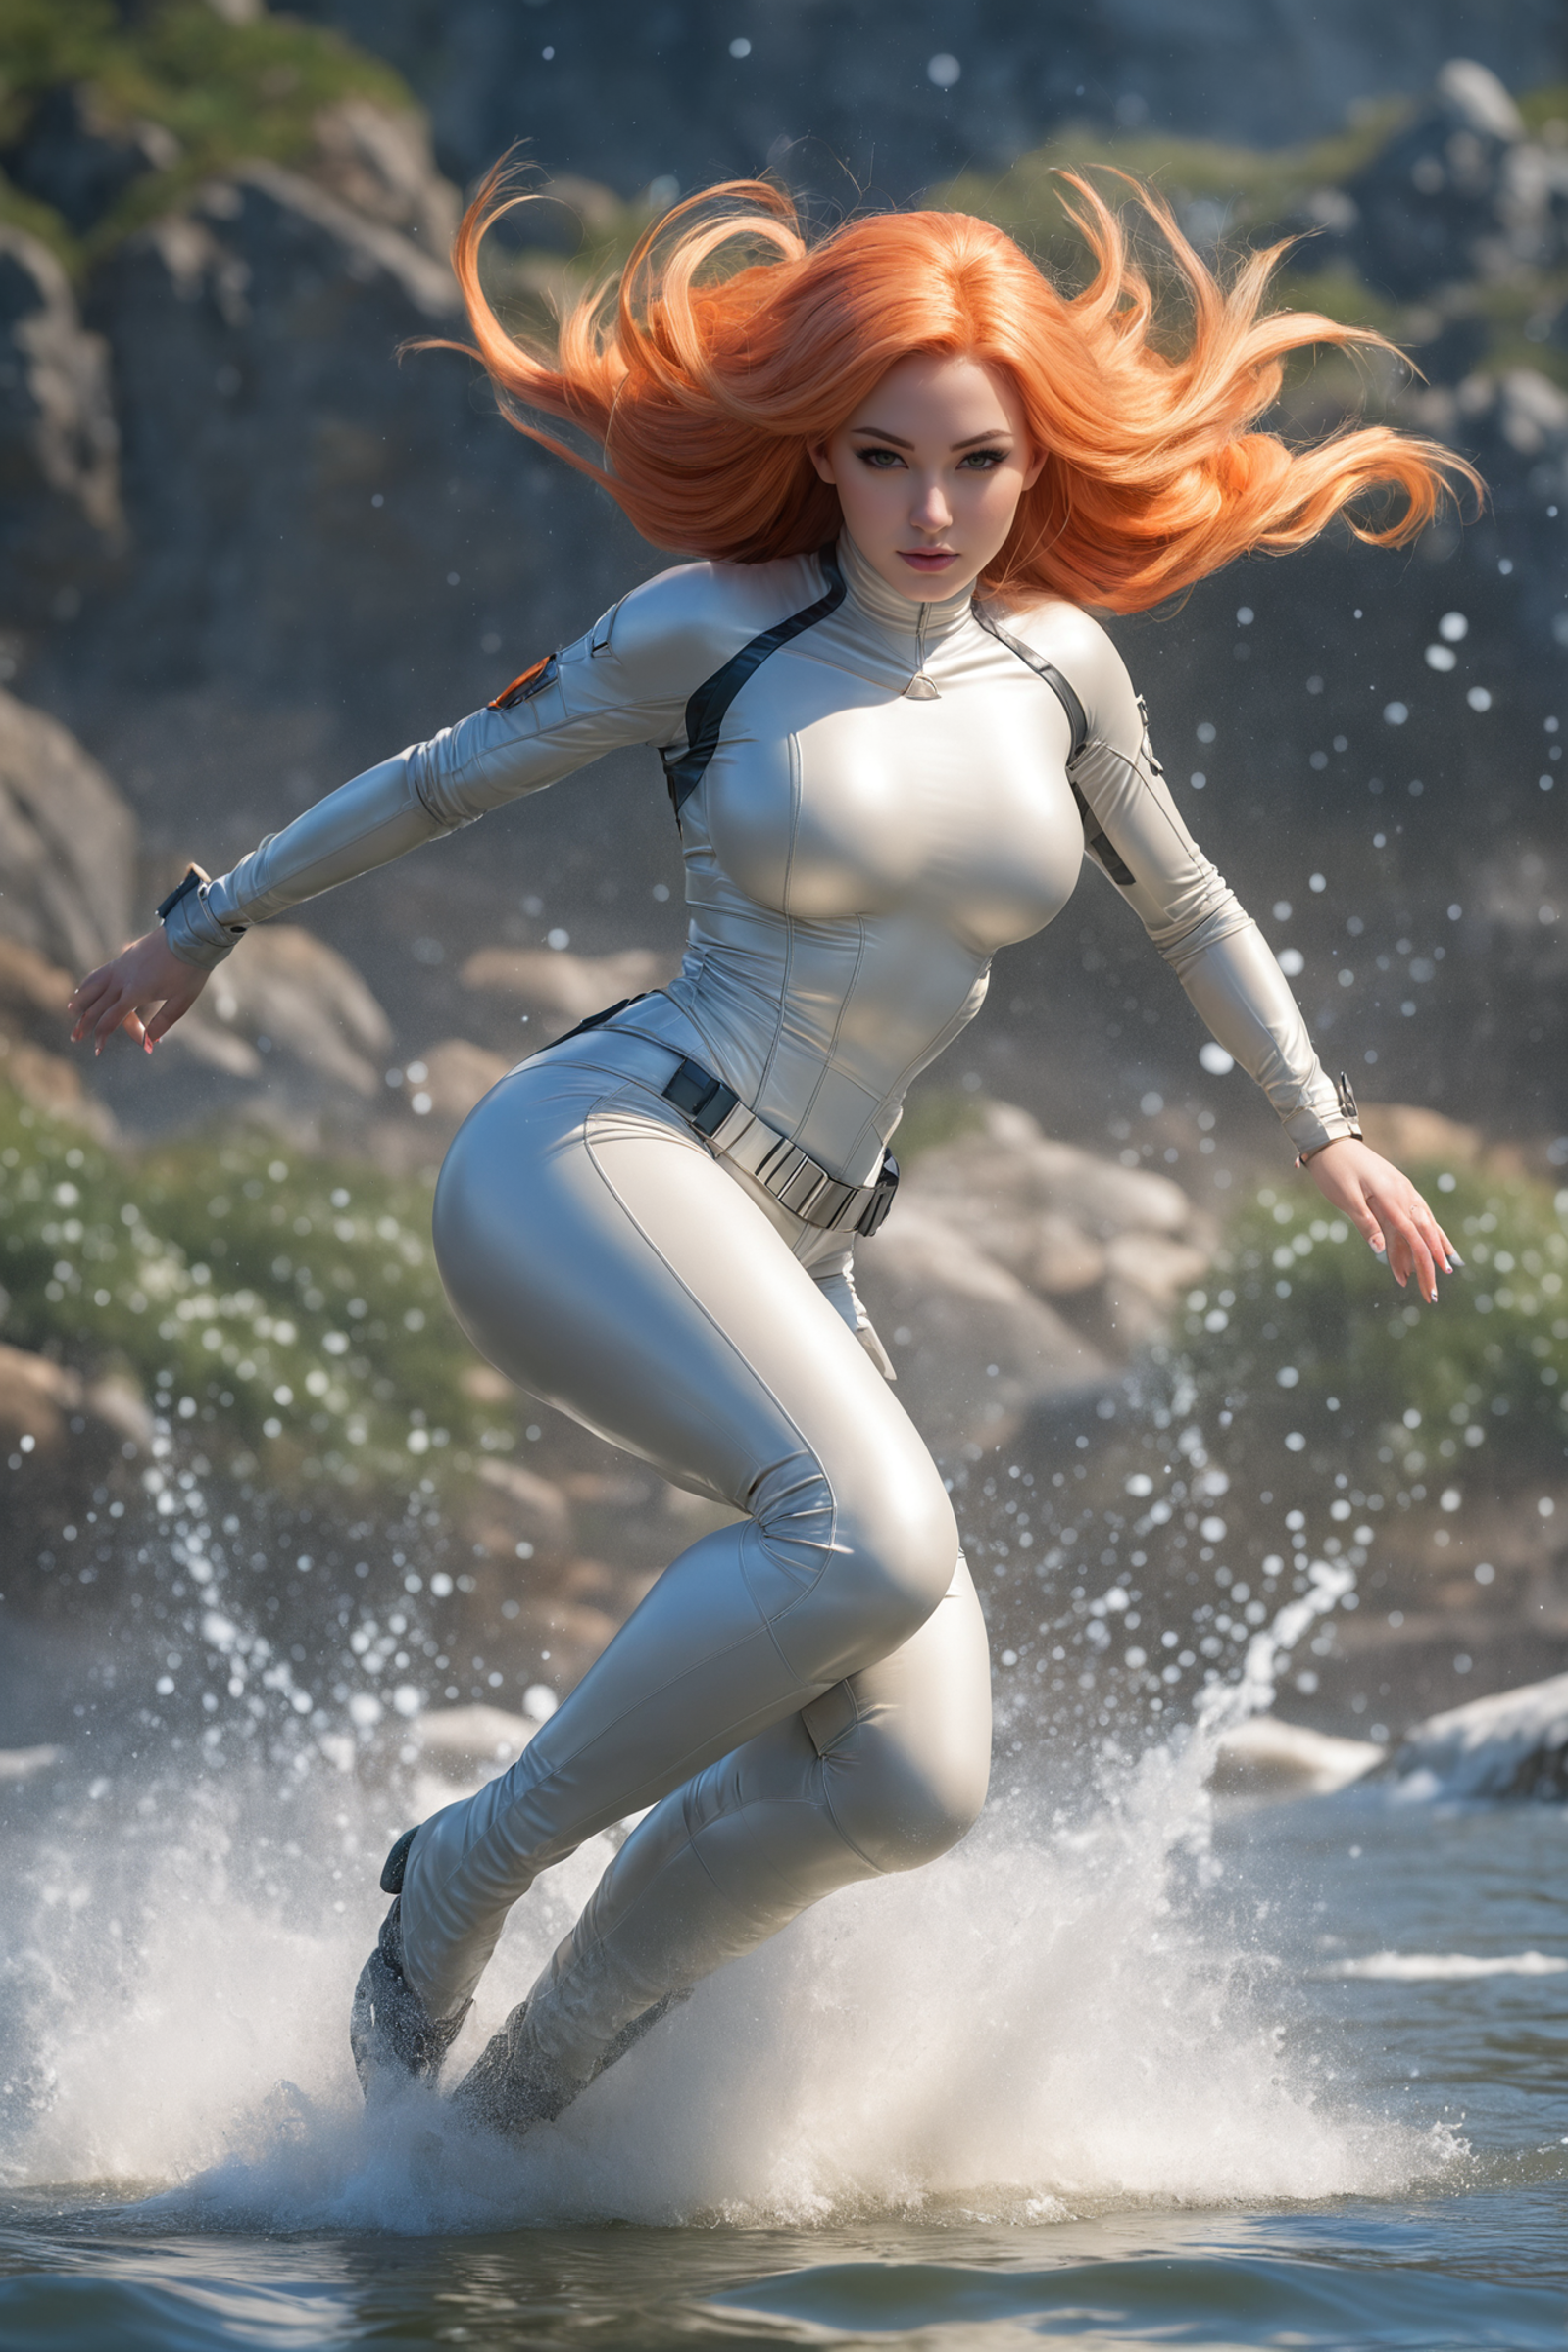 Woman in a silver suit with a cape running in the water.